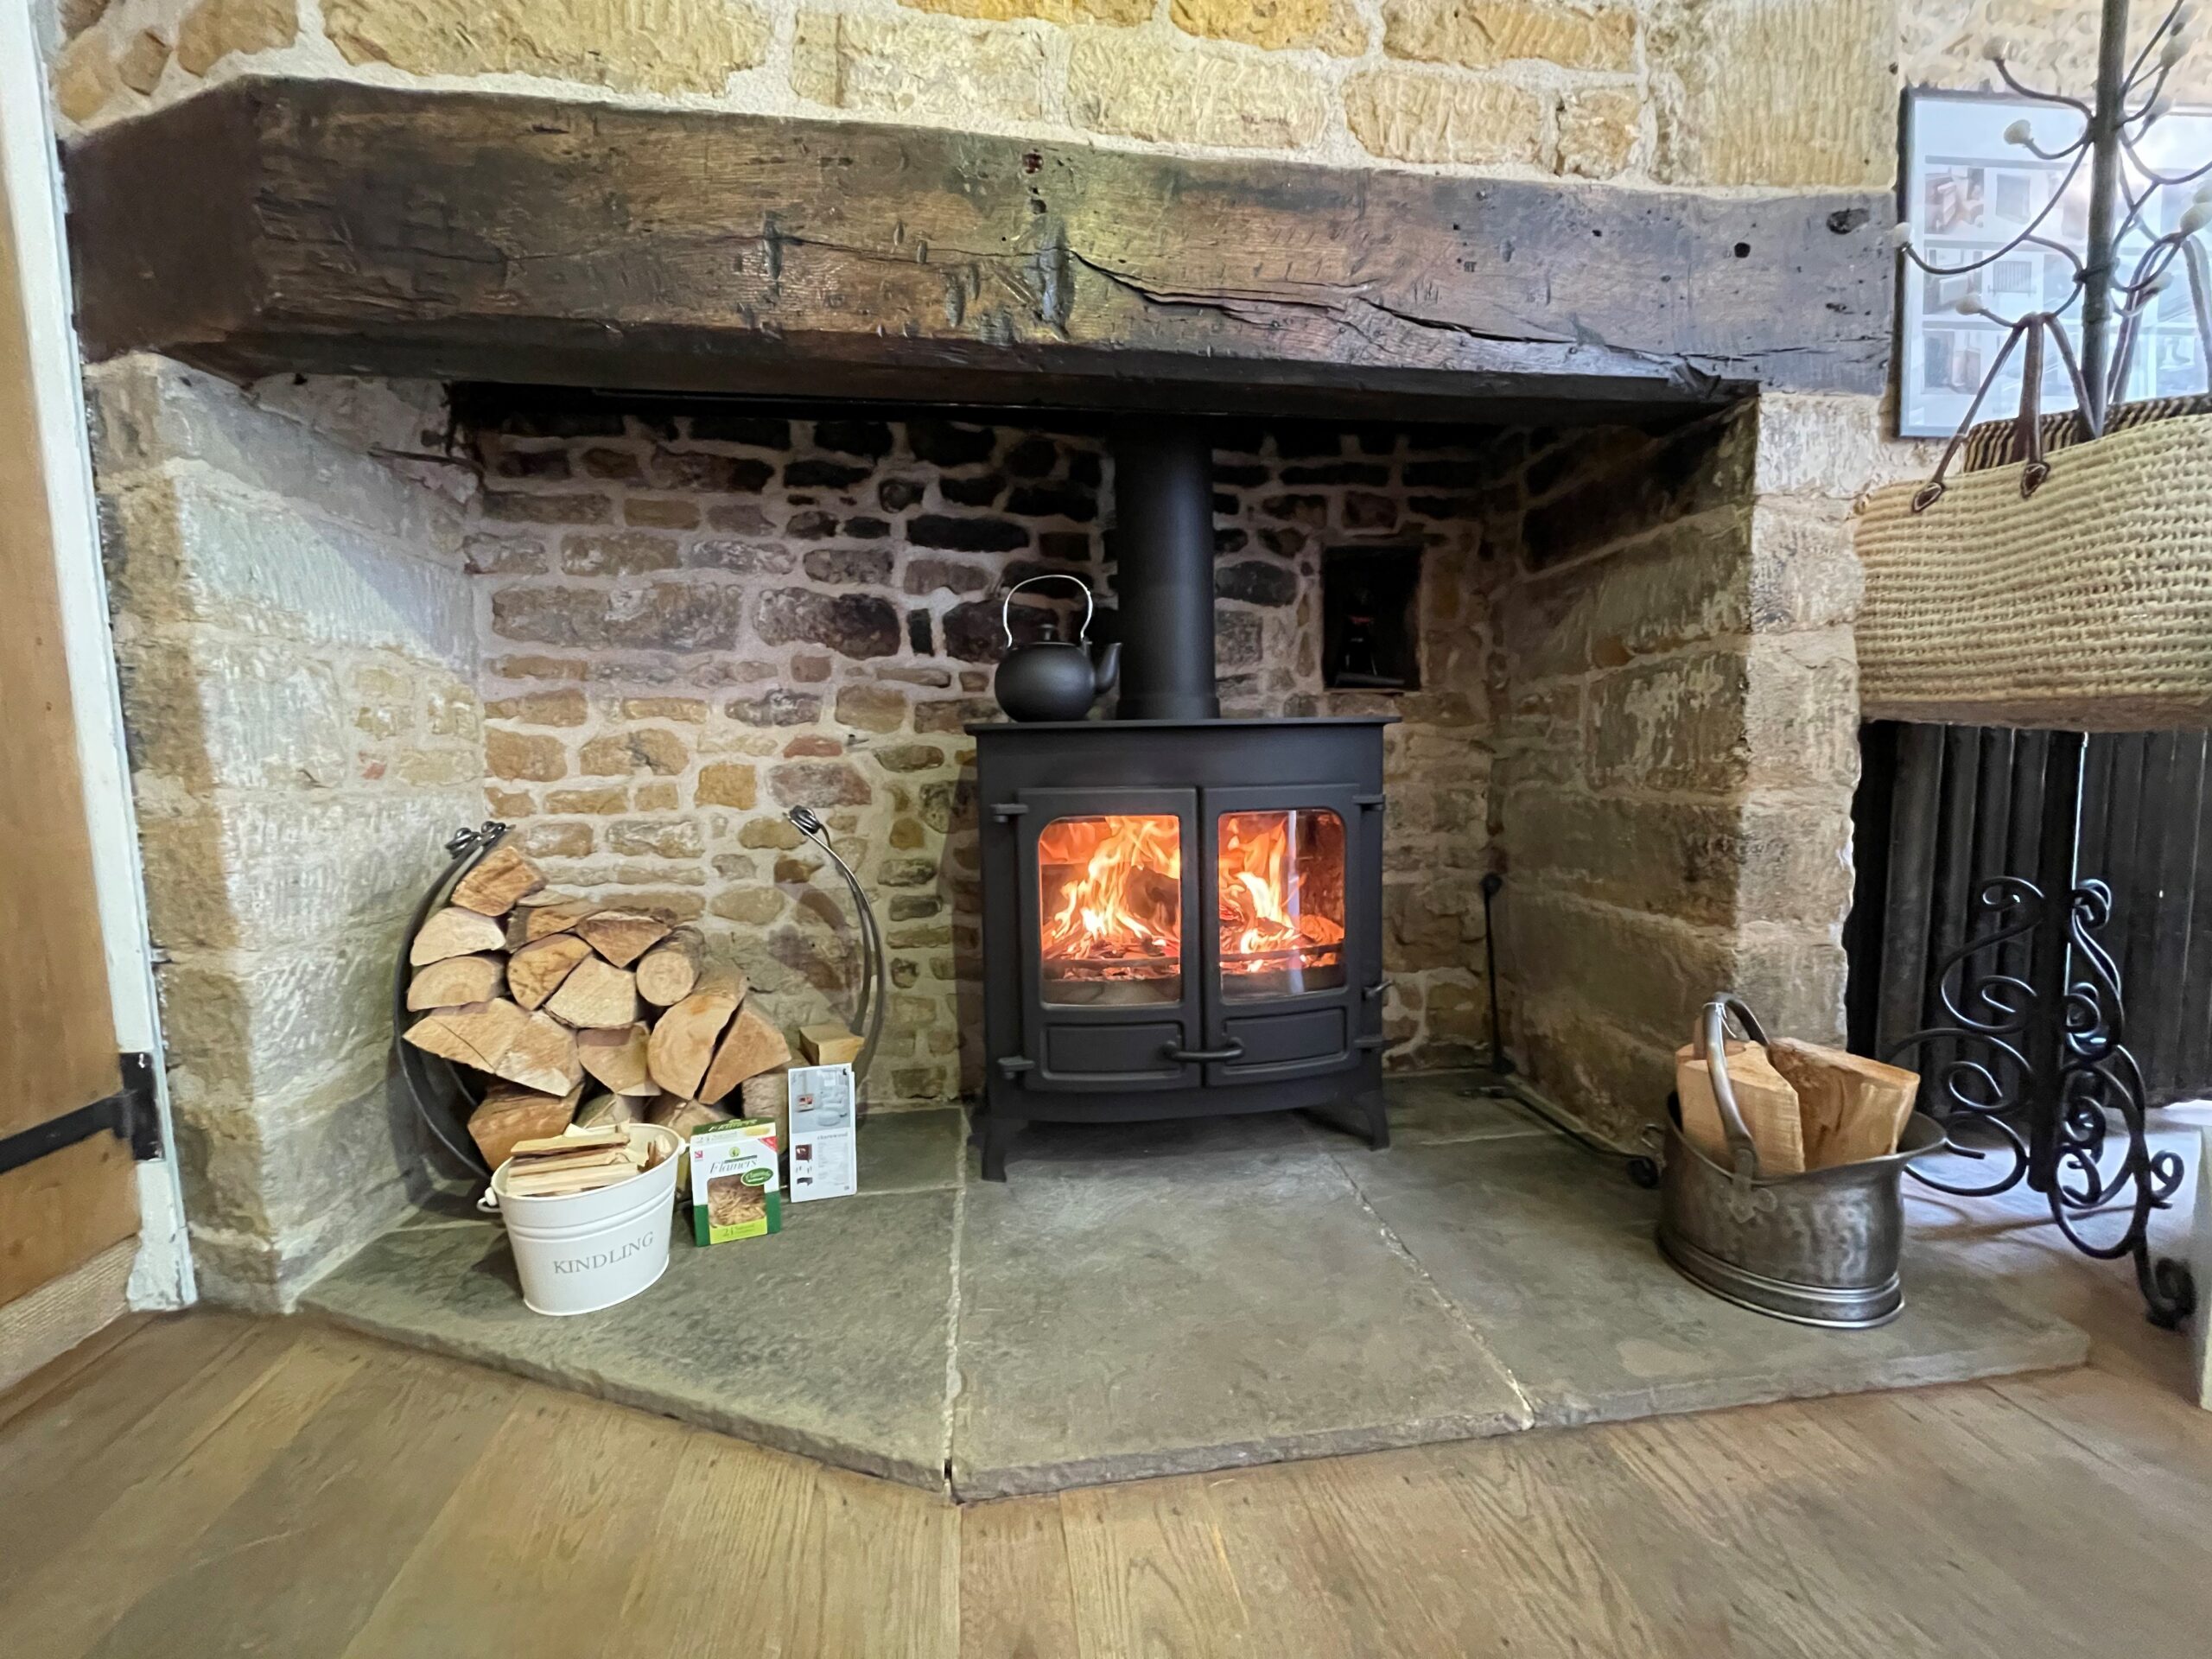 Top 7 Wood-Burning Stove Accessories - Charnwood Stoves